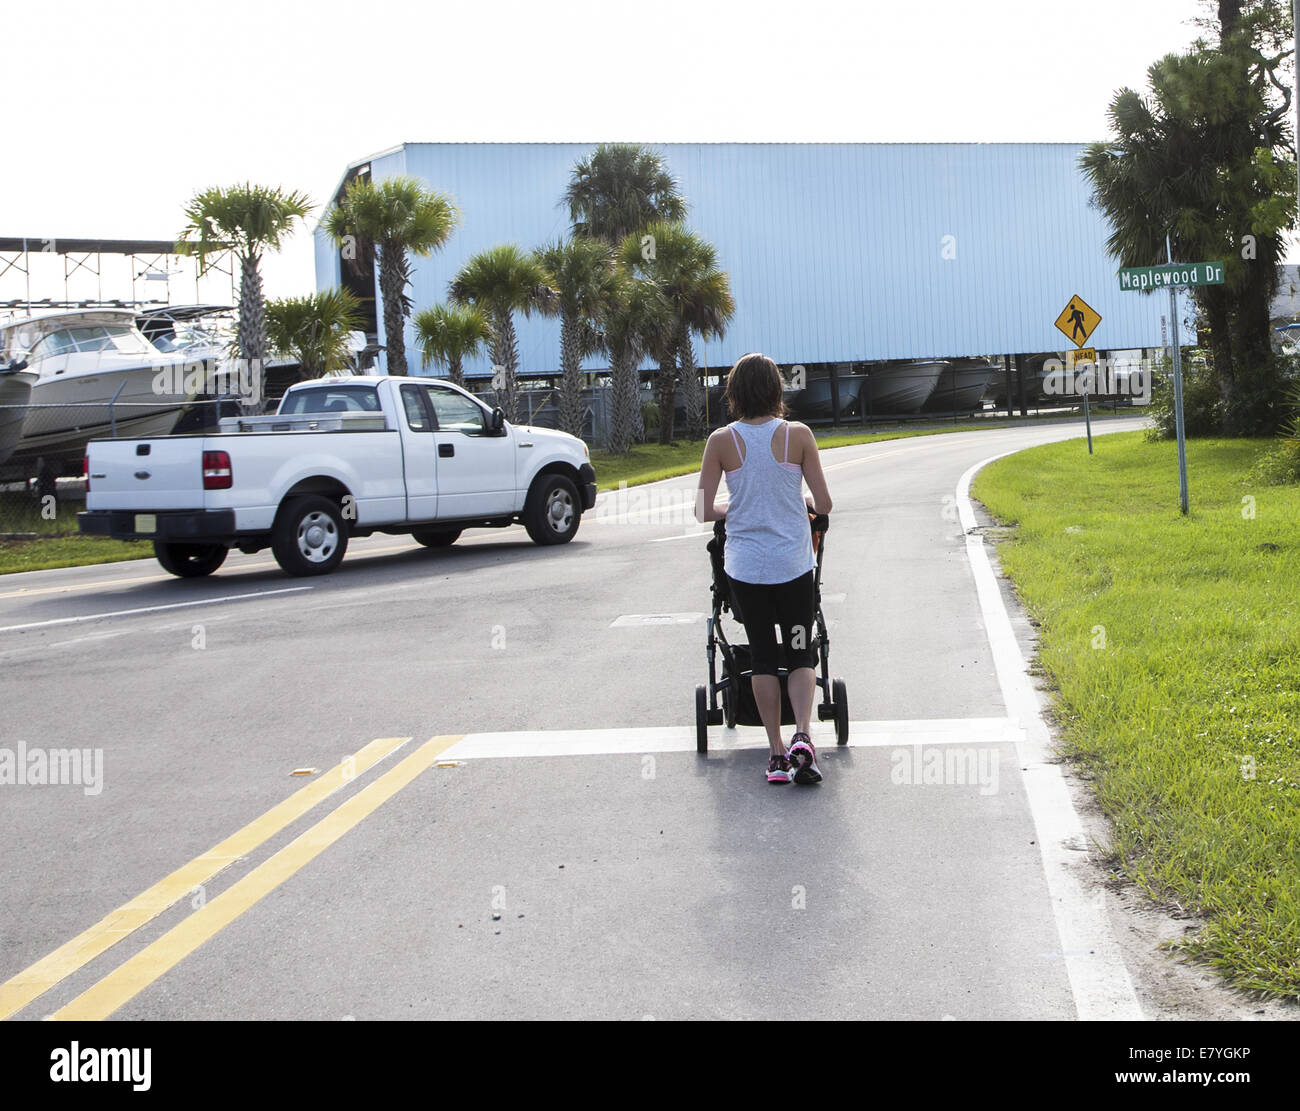 Lady pushing a stroller stopped at stop mark on road waiting for a pick up truck to go by. Stock Photo